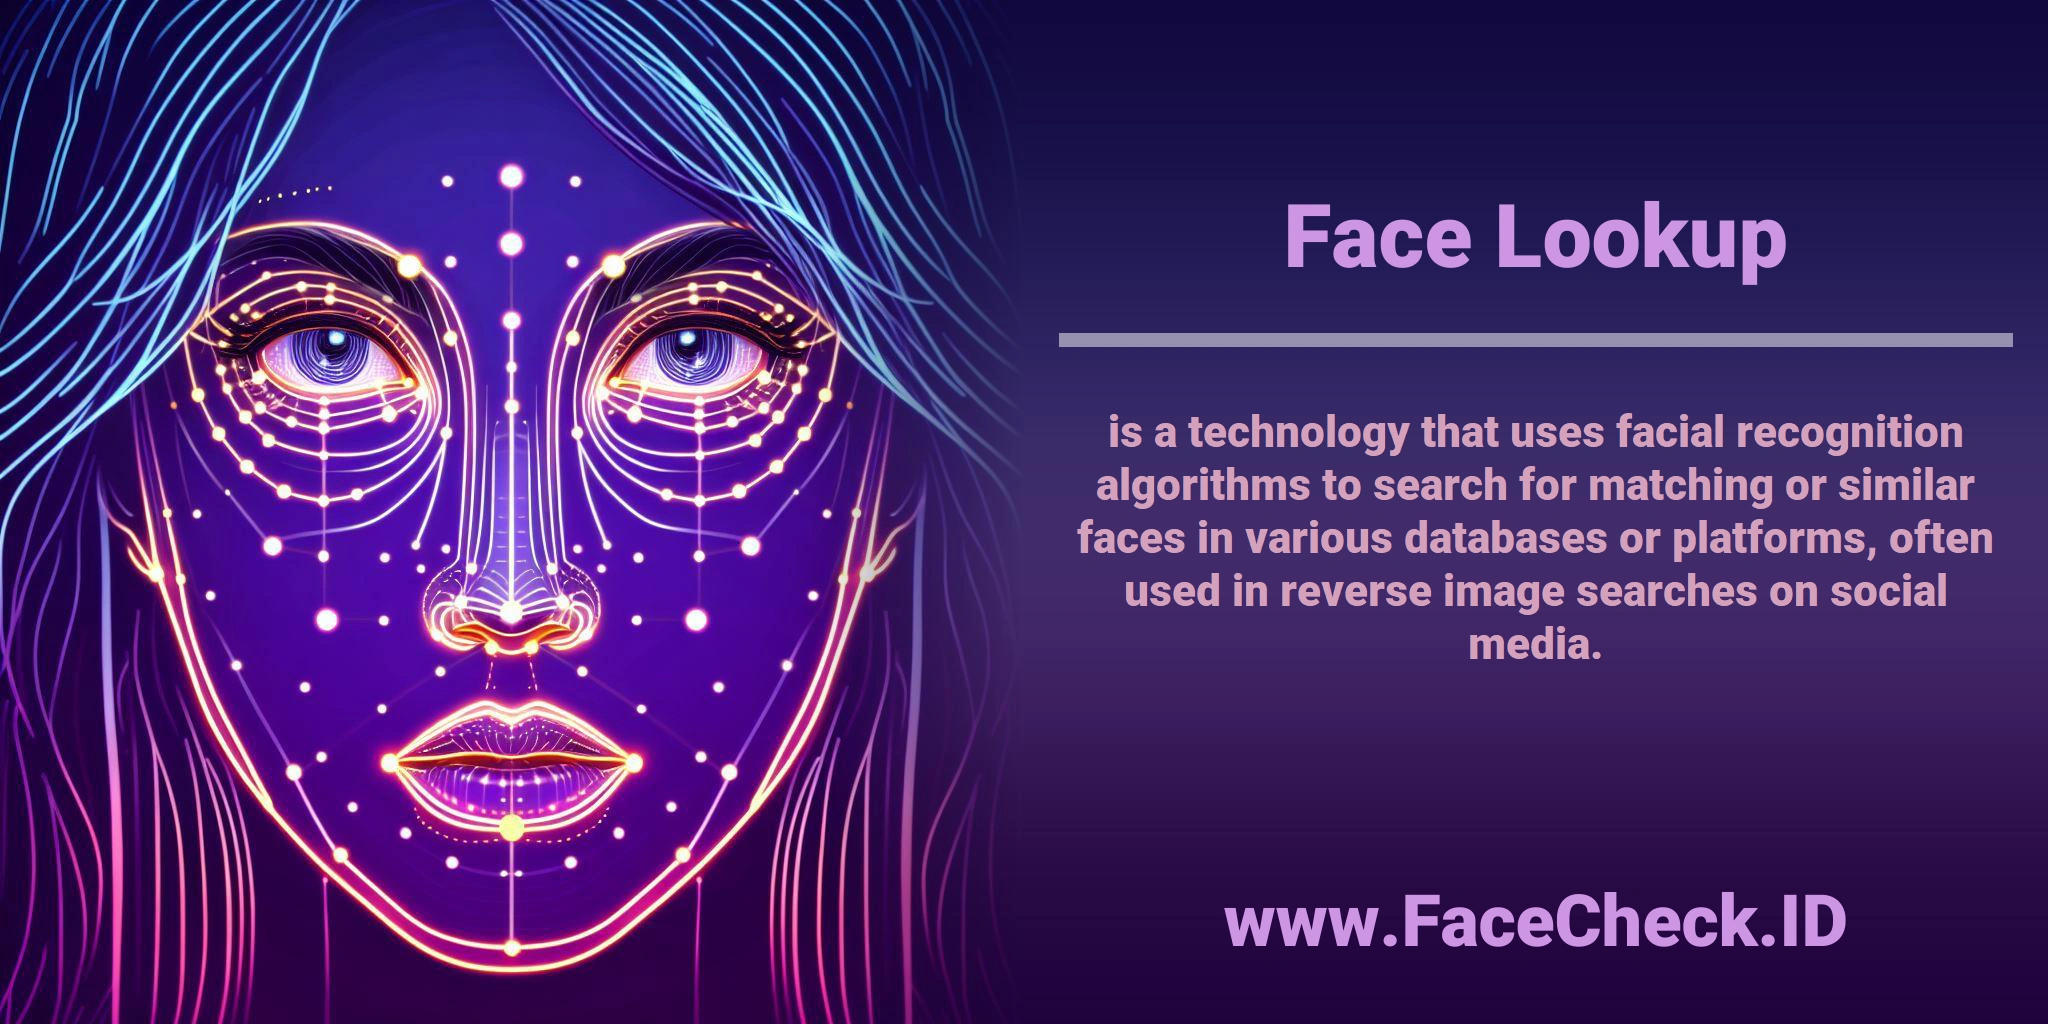 <b>Face Lookup</b> is a technology that uses facial recognition algorithms to search for matching or similar faces in various databases or platforms, often used in reverse image searches on social media.